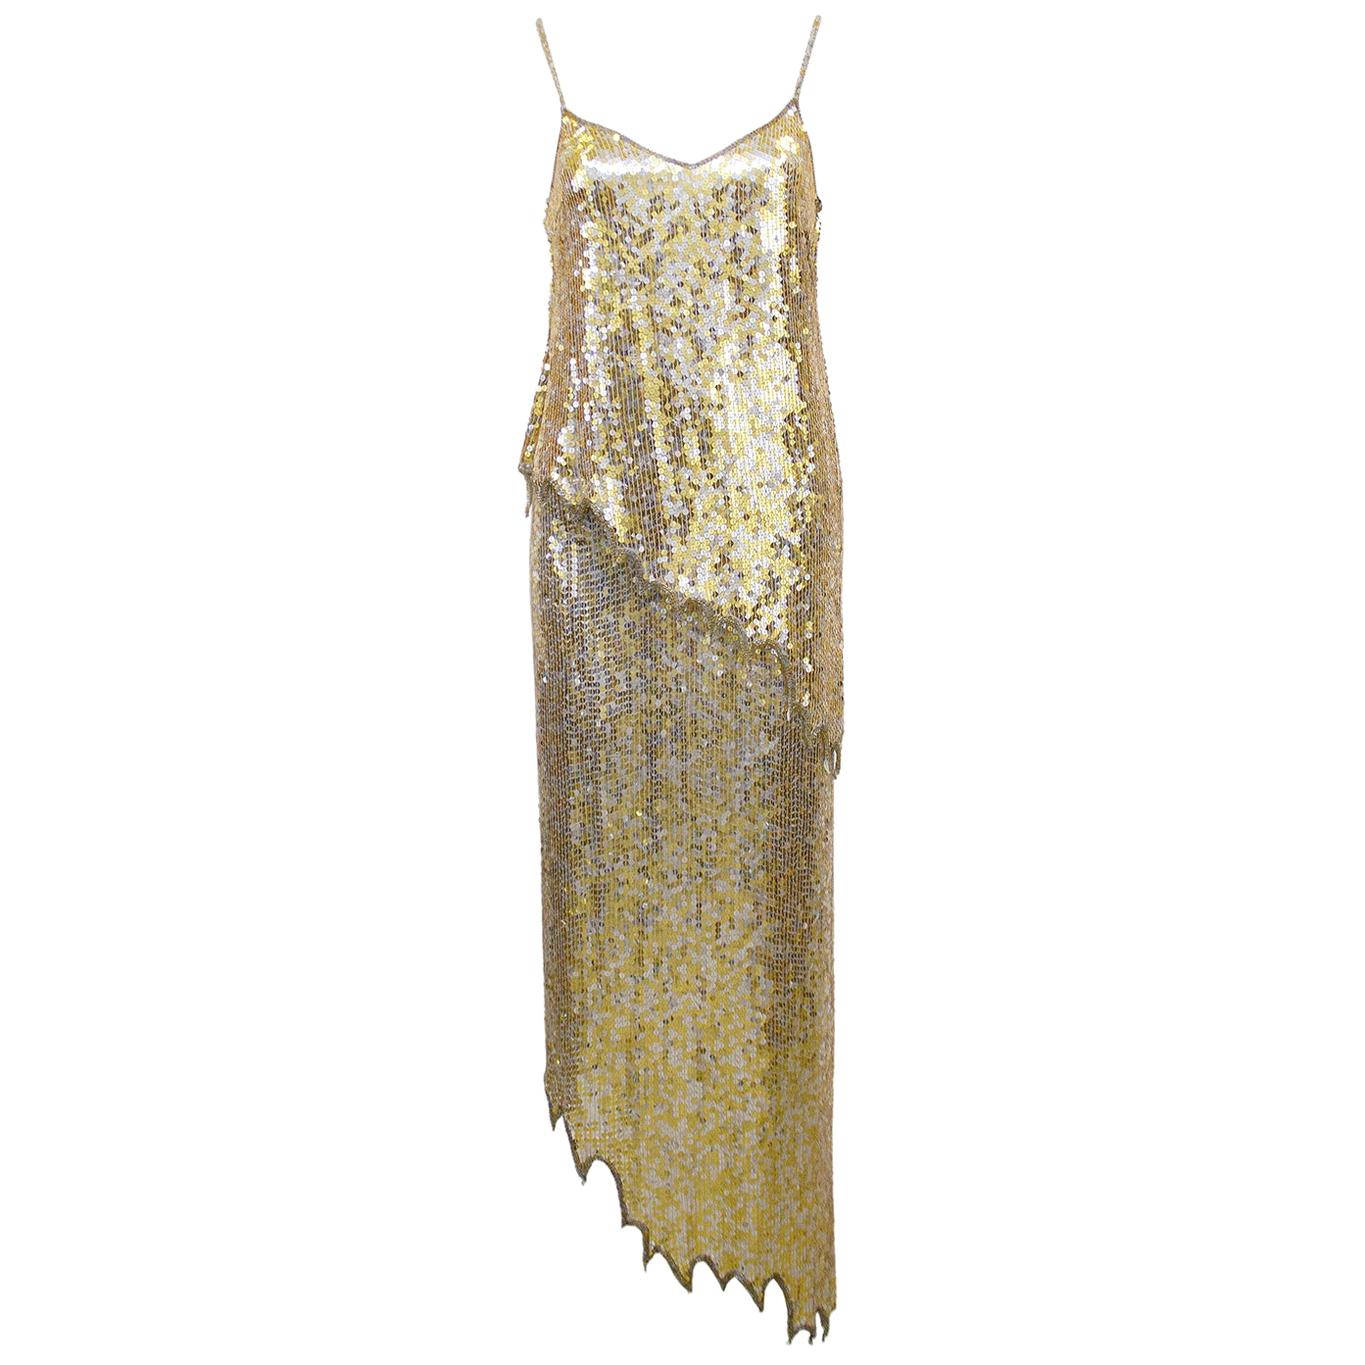 Glitzy 1980s Lillie Rubin top and skirt ensemble. Allover gold and silver sequins with small gold and silver beaded trim and straps. Top features spaghetti straps, v neckline and asymmetrical scalloped hem. Skirt is high waisted, straight and a